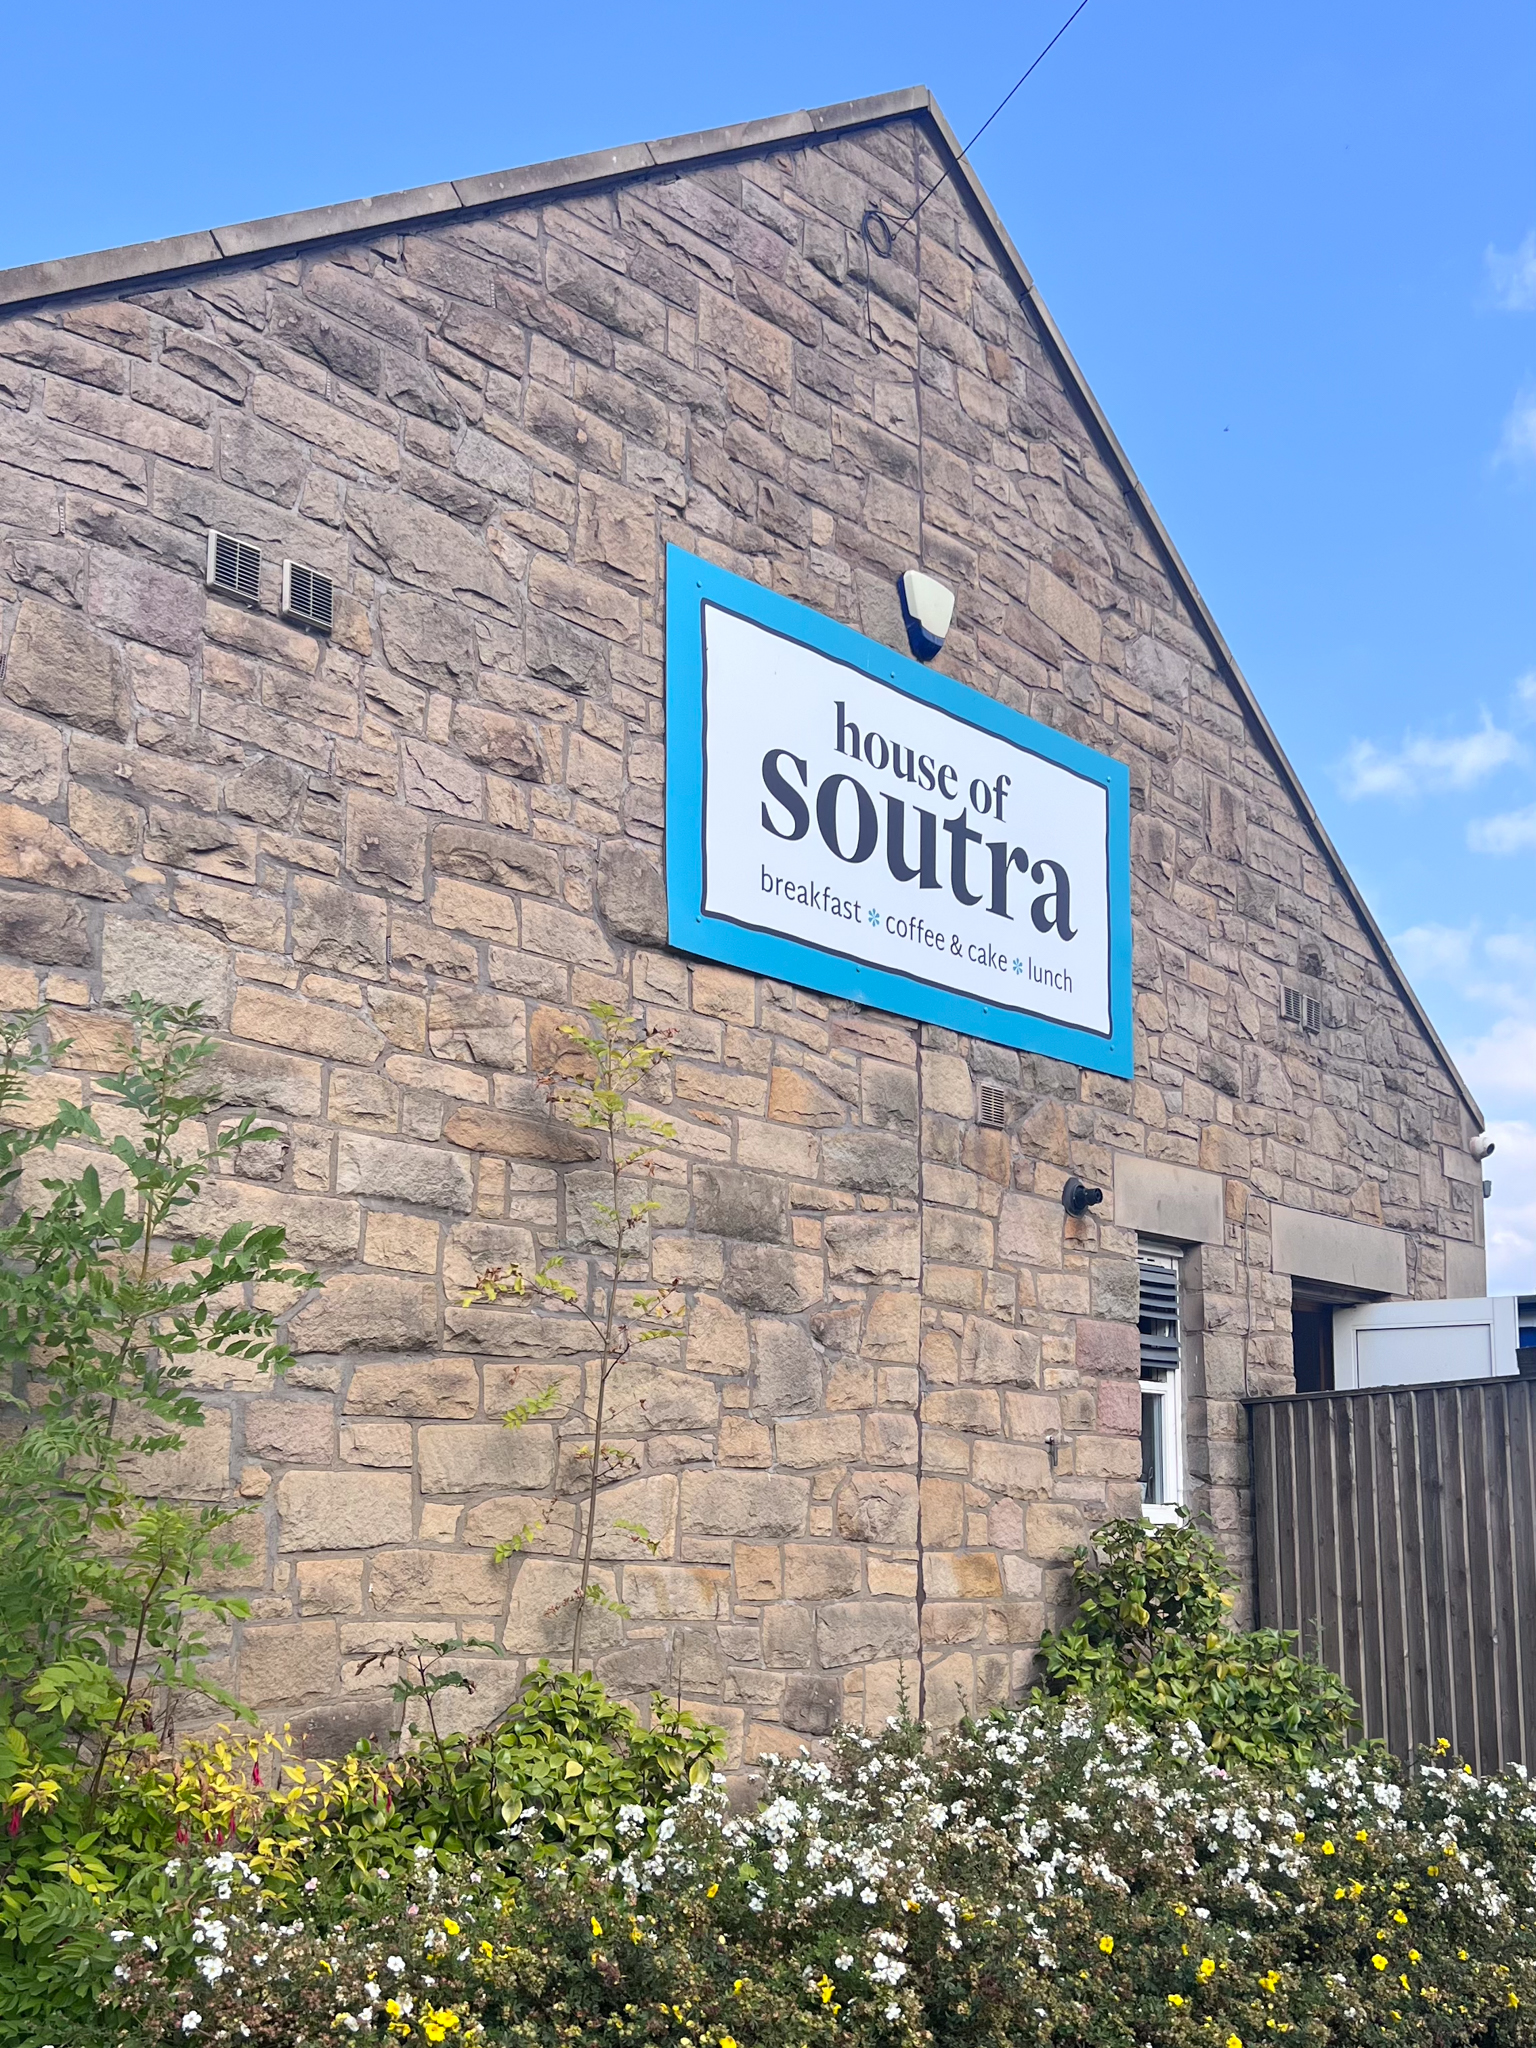 Front sign of House of Soutra